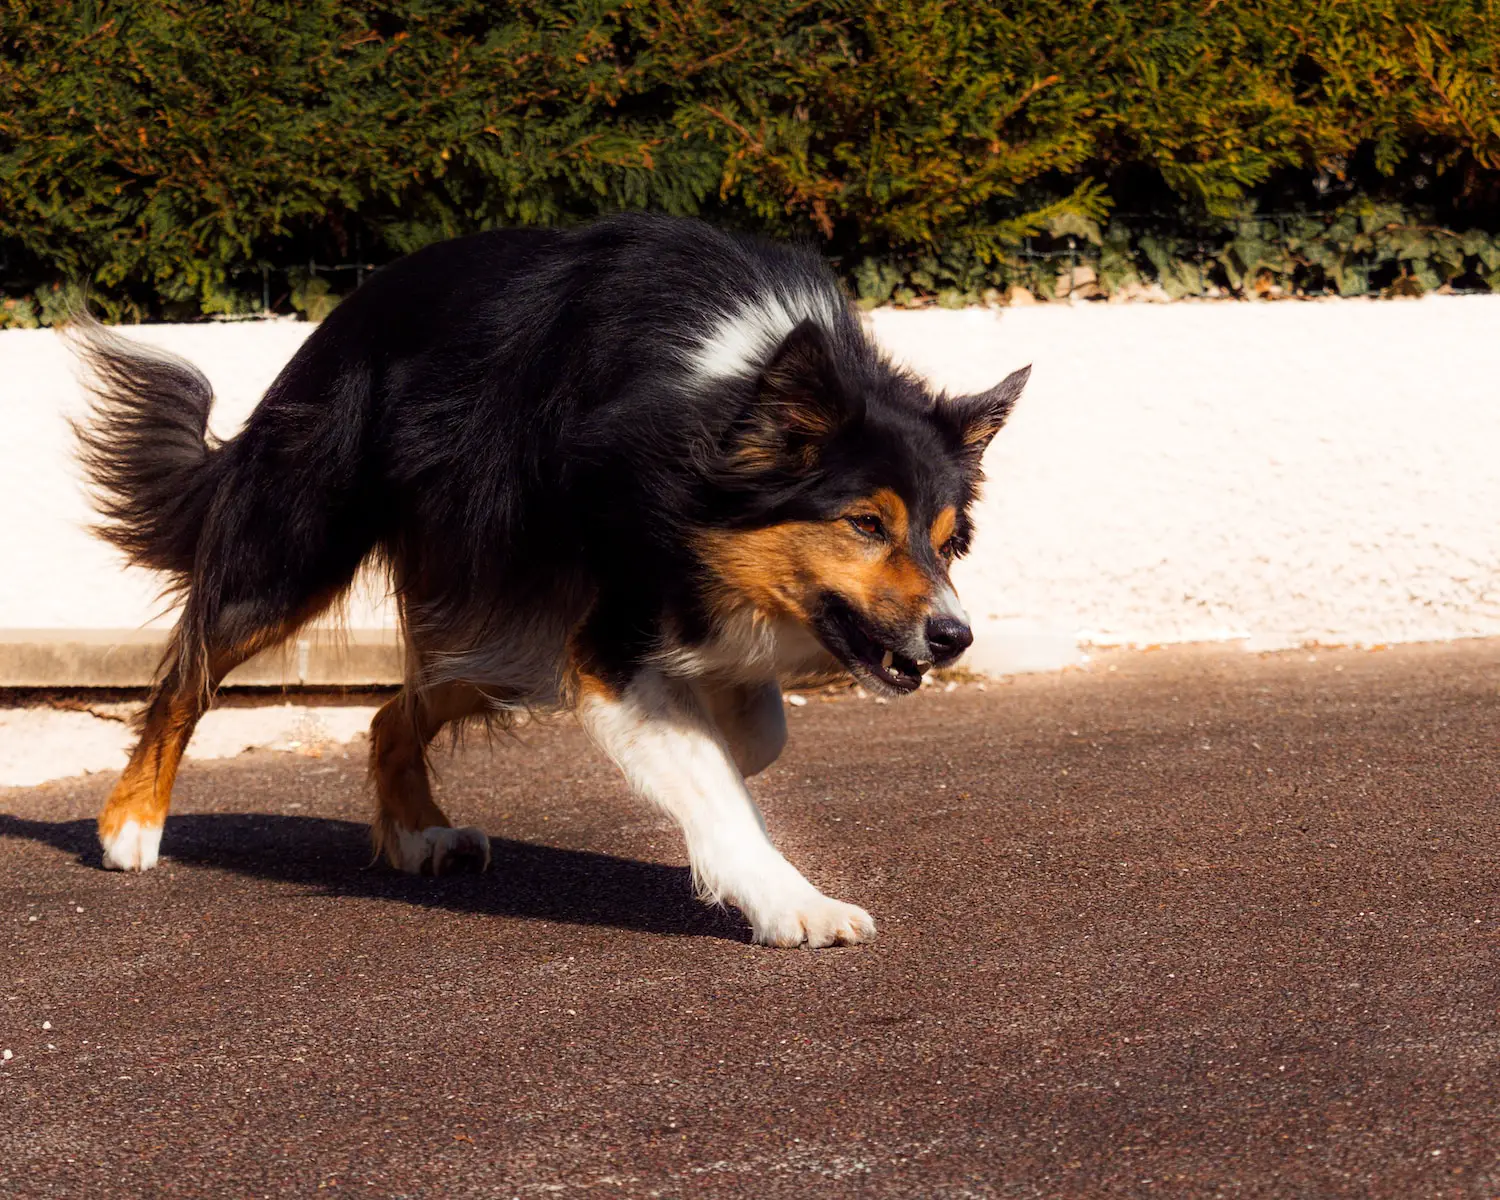 black white and brown long coated dog walking on gray concrete road during daytime